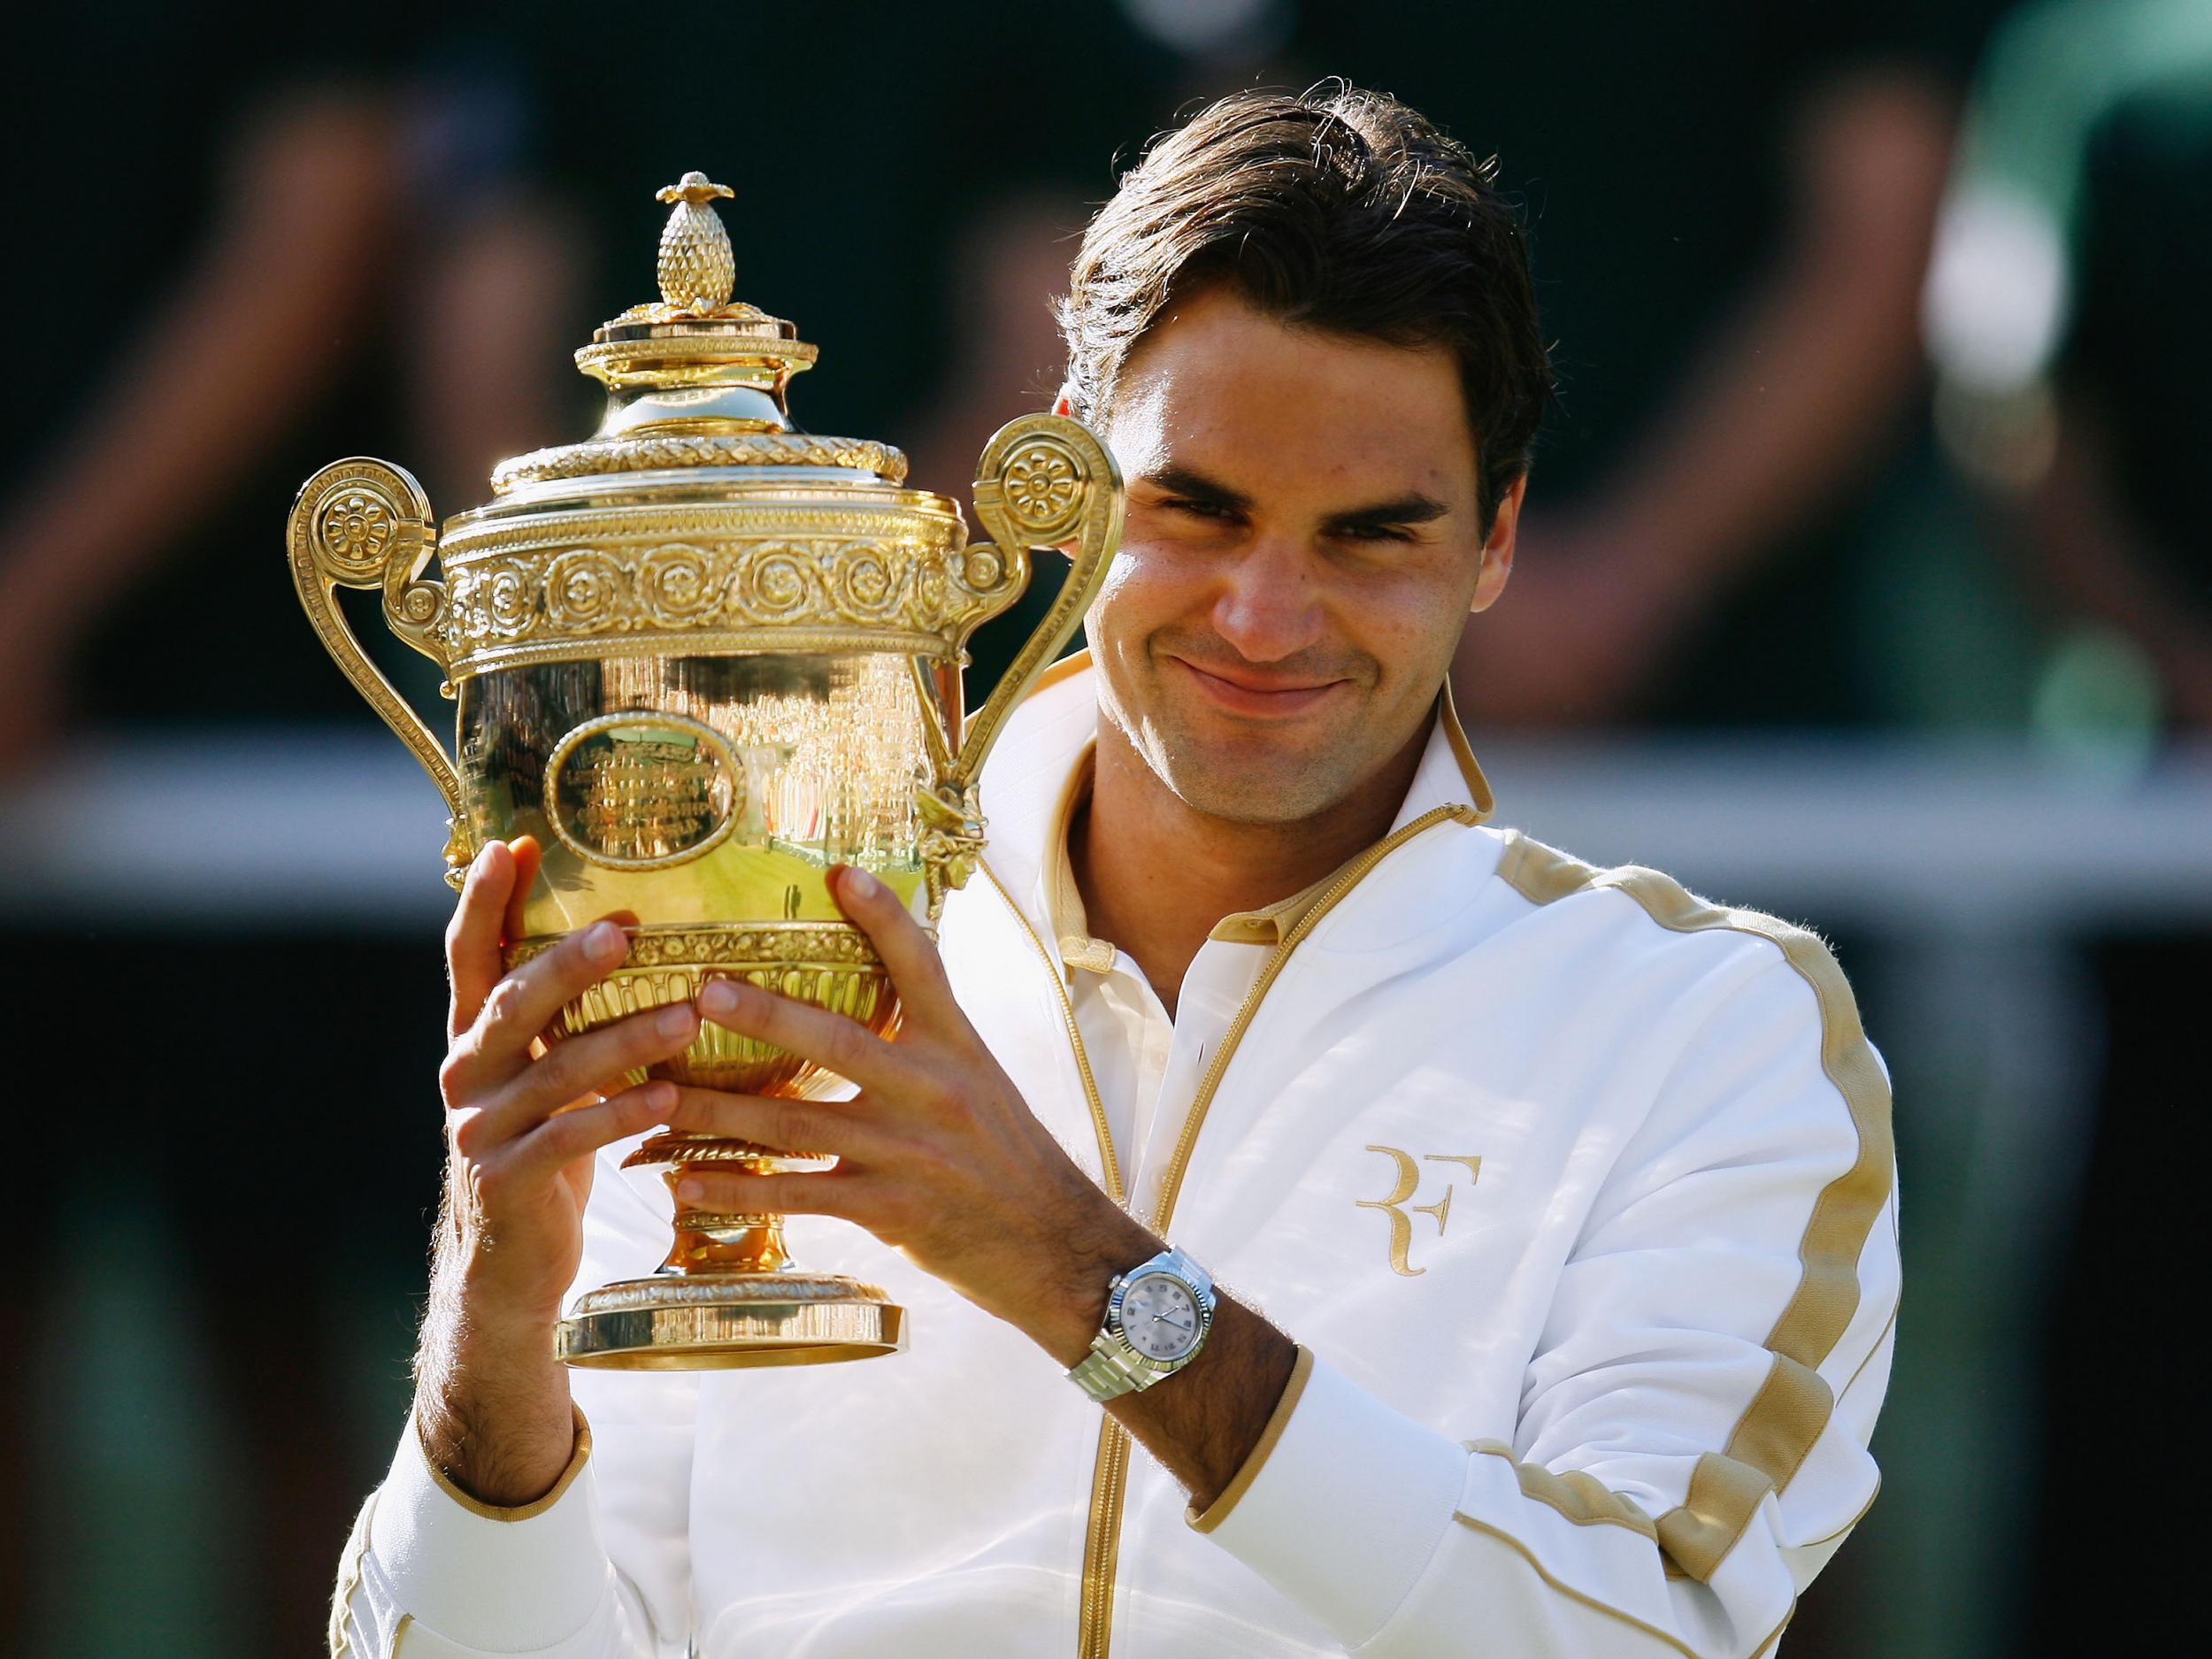 Federer is aiming to win Wimbledon for a record-breaking eighth time